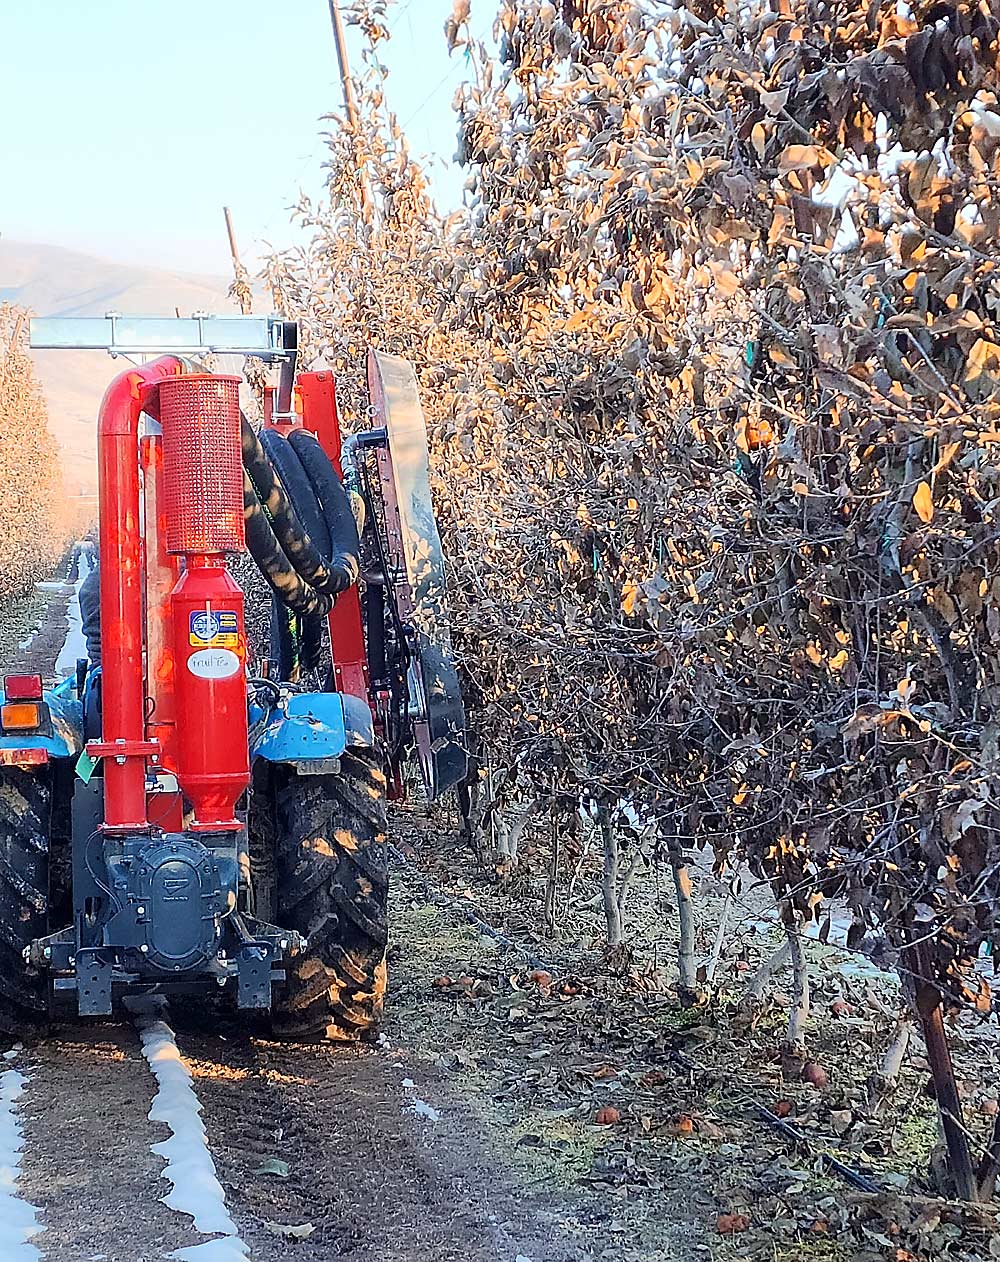 A pneumatic leaf blower proves the most effective at removing leaves during the trial but required multiple passes on each row. (Courtesy Keith Veselka/NWFM)